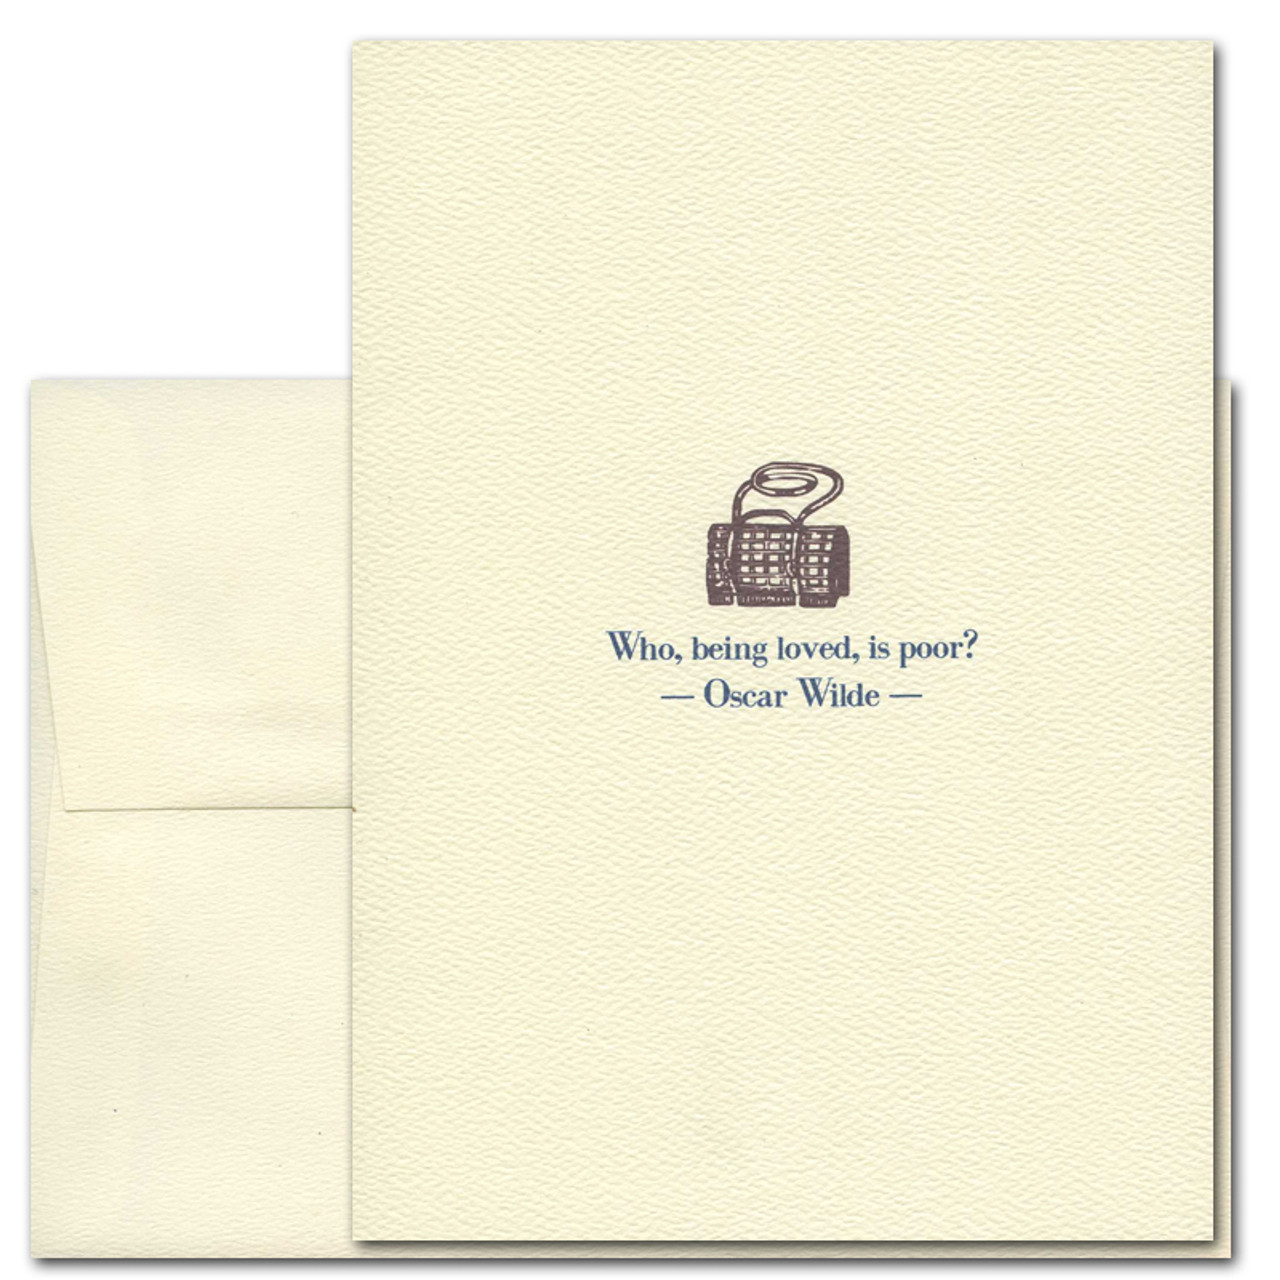 Quotation Card Who Is Poor: Wilde Cover shows a vintage illustration of a purse with a quote by Oscar Wilde that reads Who, being loved, is poor? 